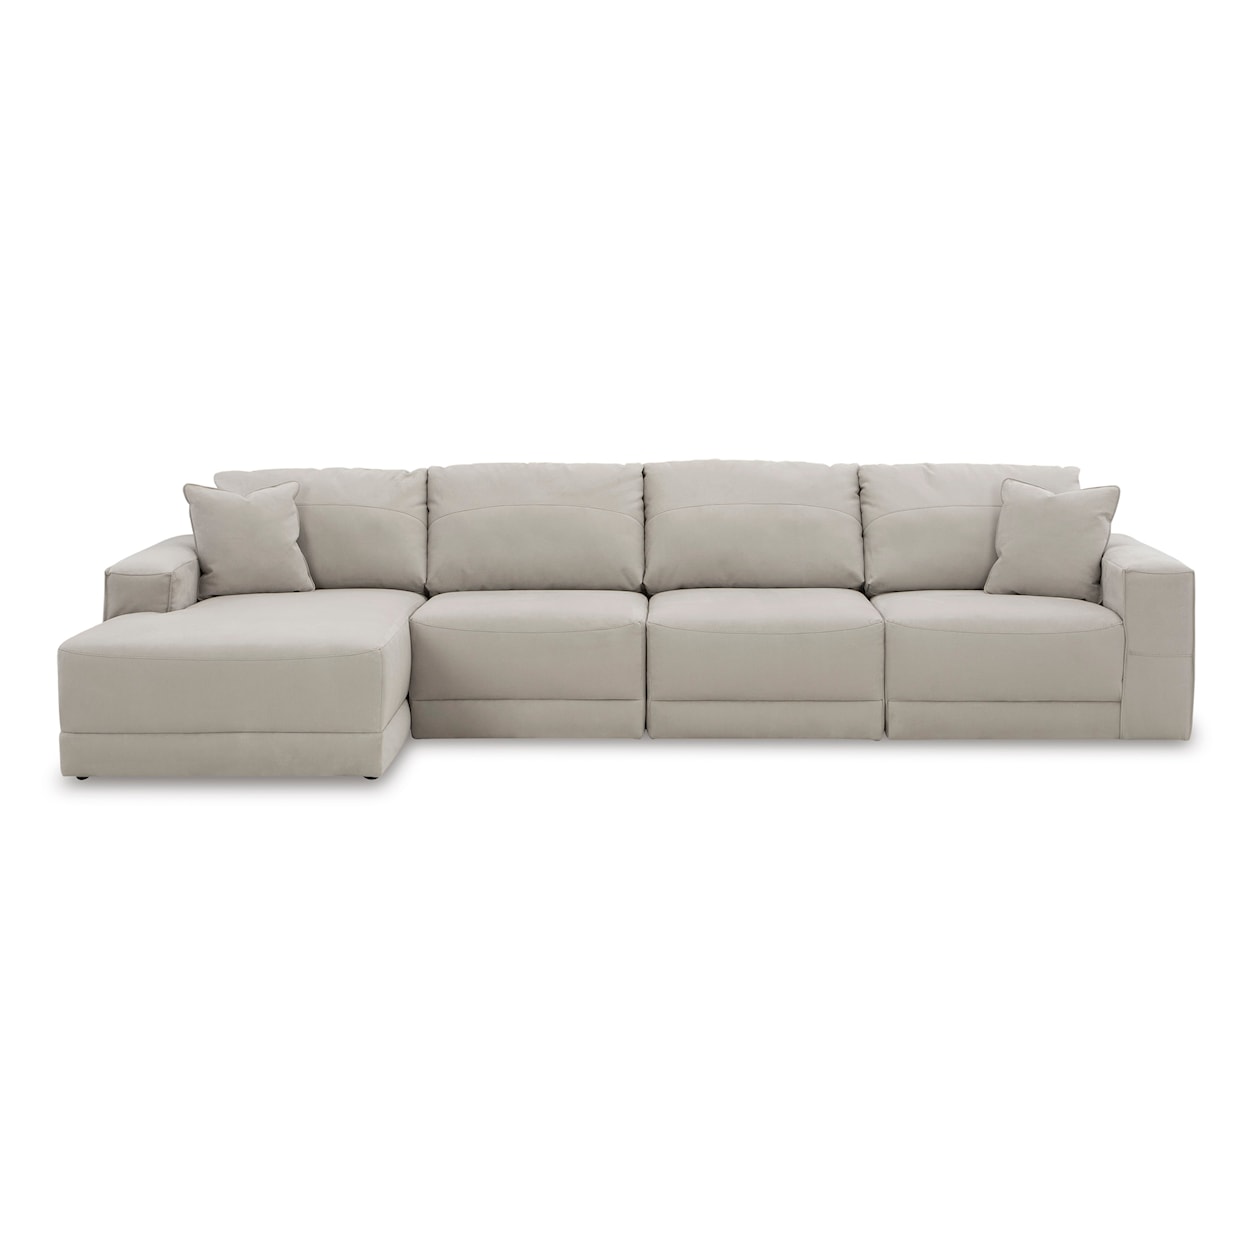 Benchcraft by Ashley Next-Gen Gaucho 4-Piece Sectional Sofa with Chaise